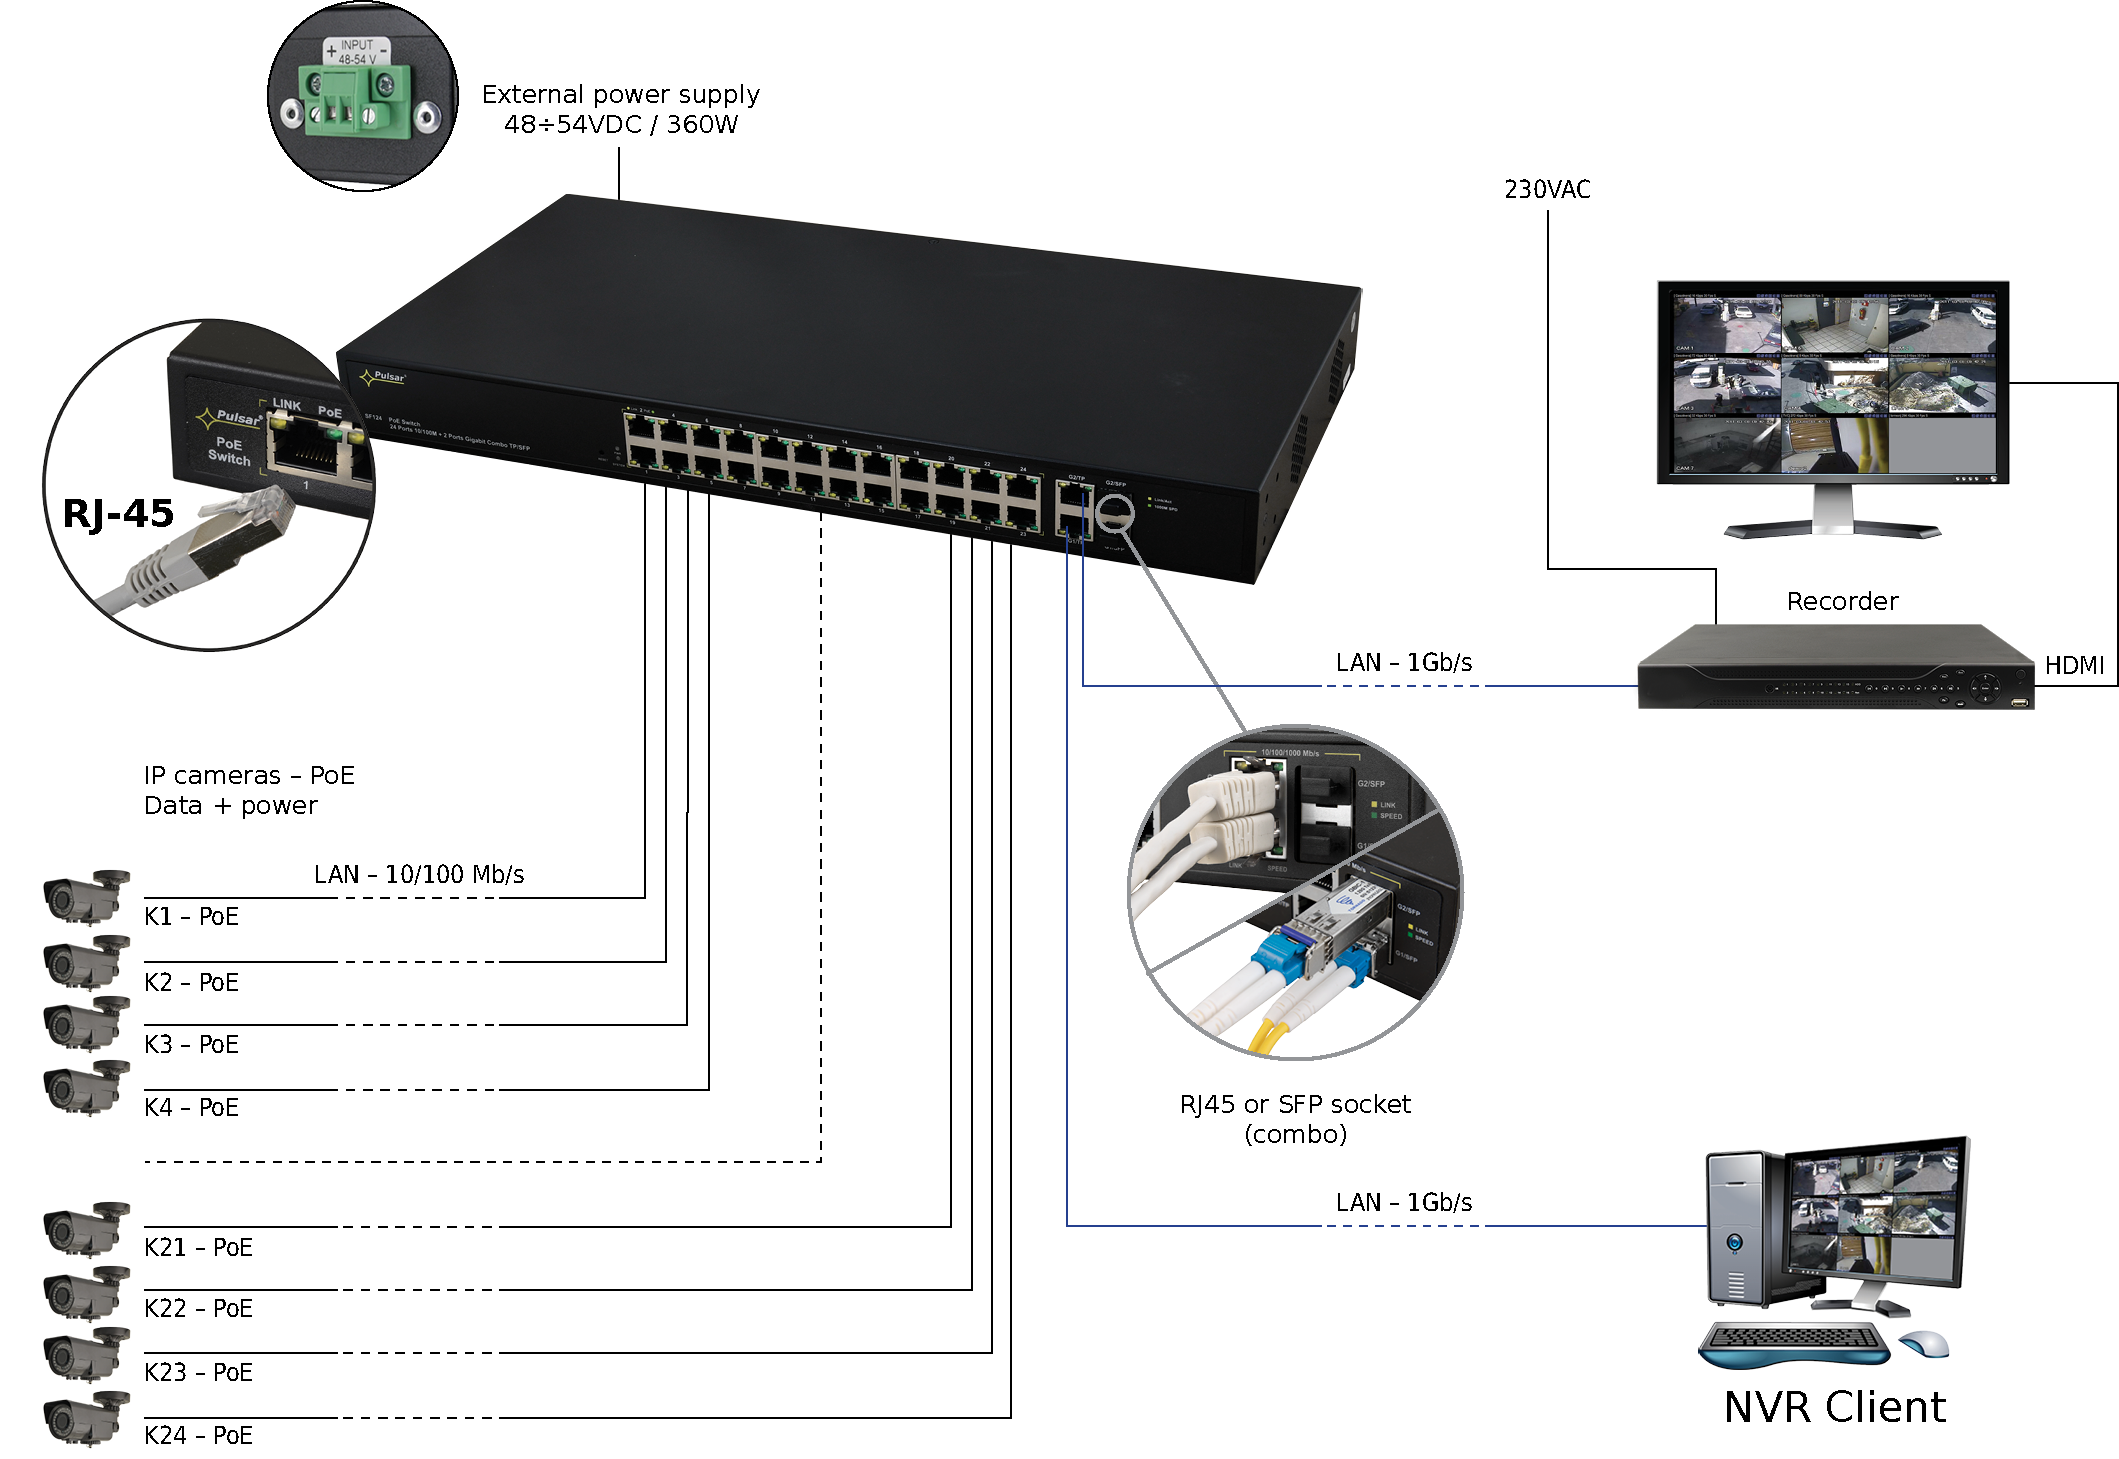 Camera PoE Switch, 9 and 24 port GB PoE Switches - WifiSoft